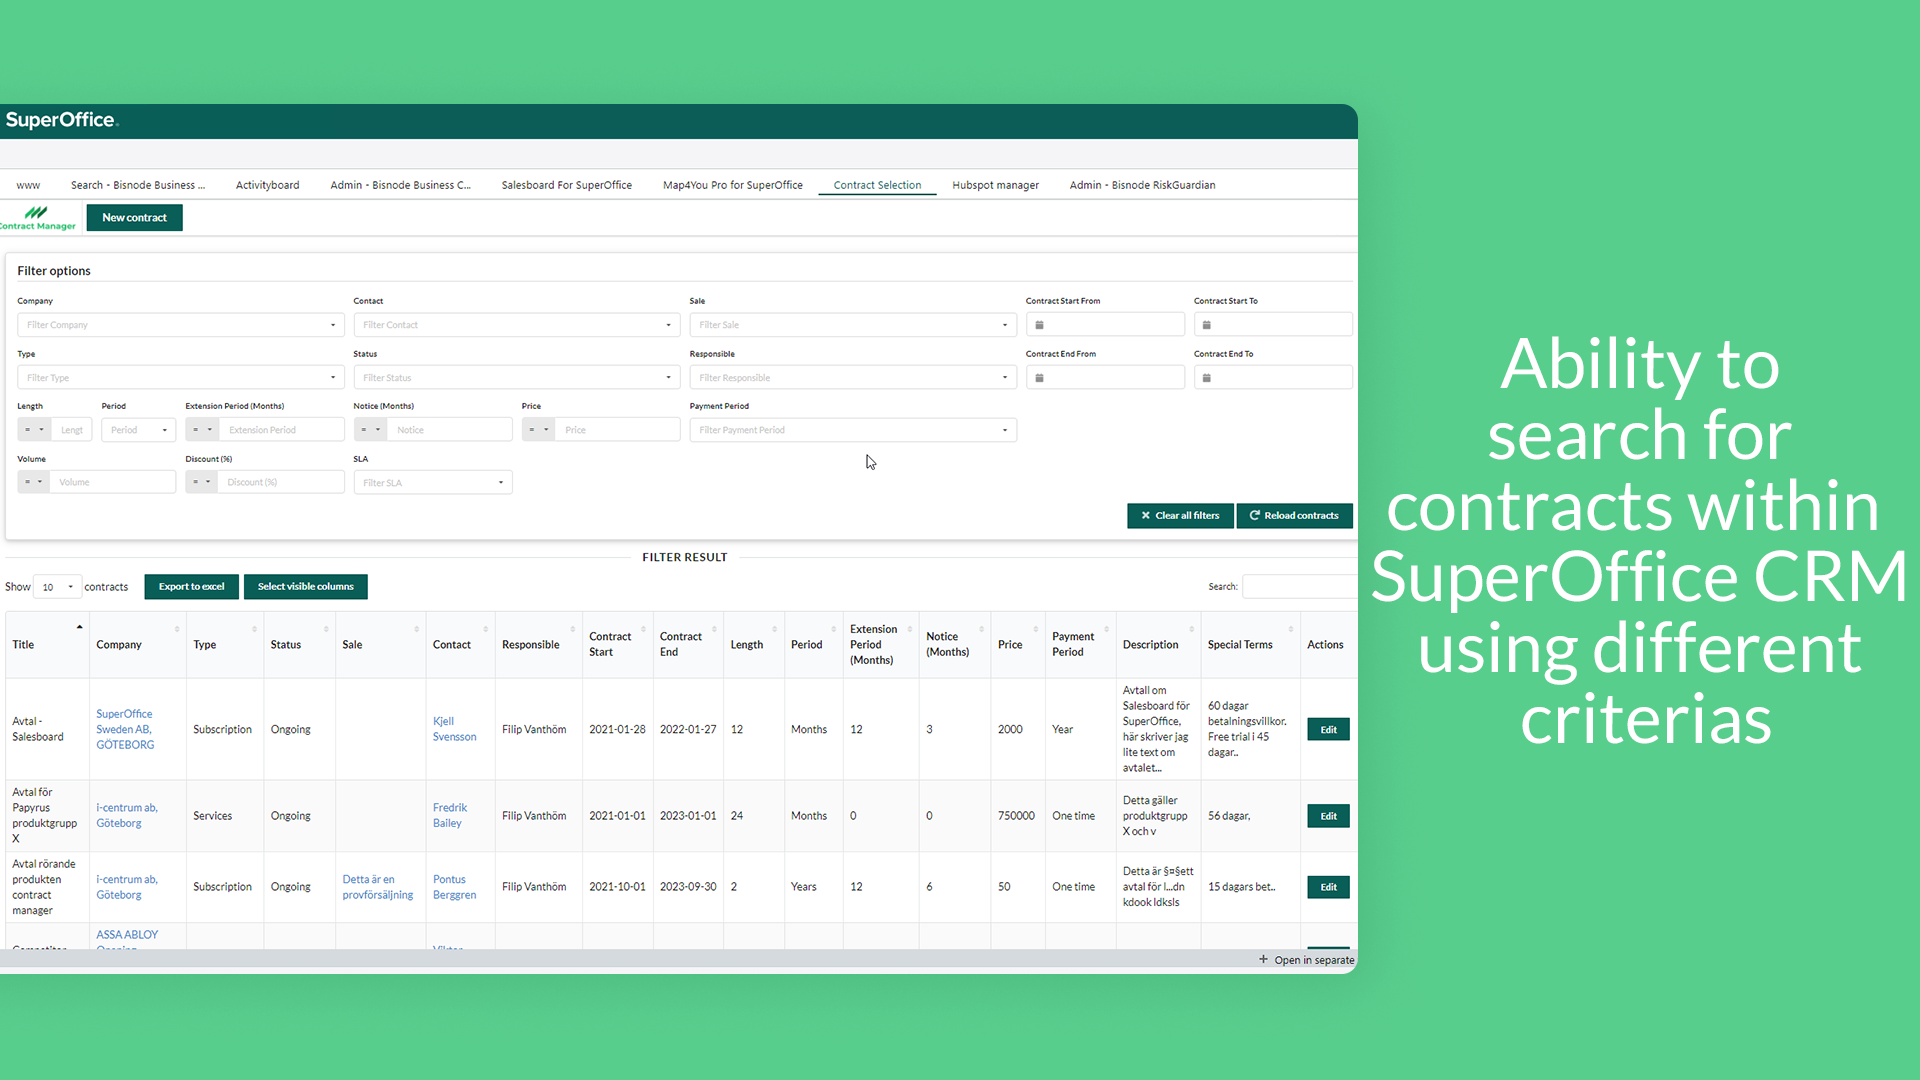 Ability to search for contracts within your CRM using different criterias